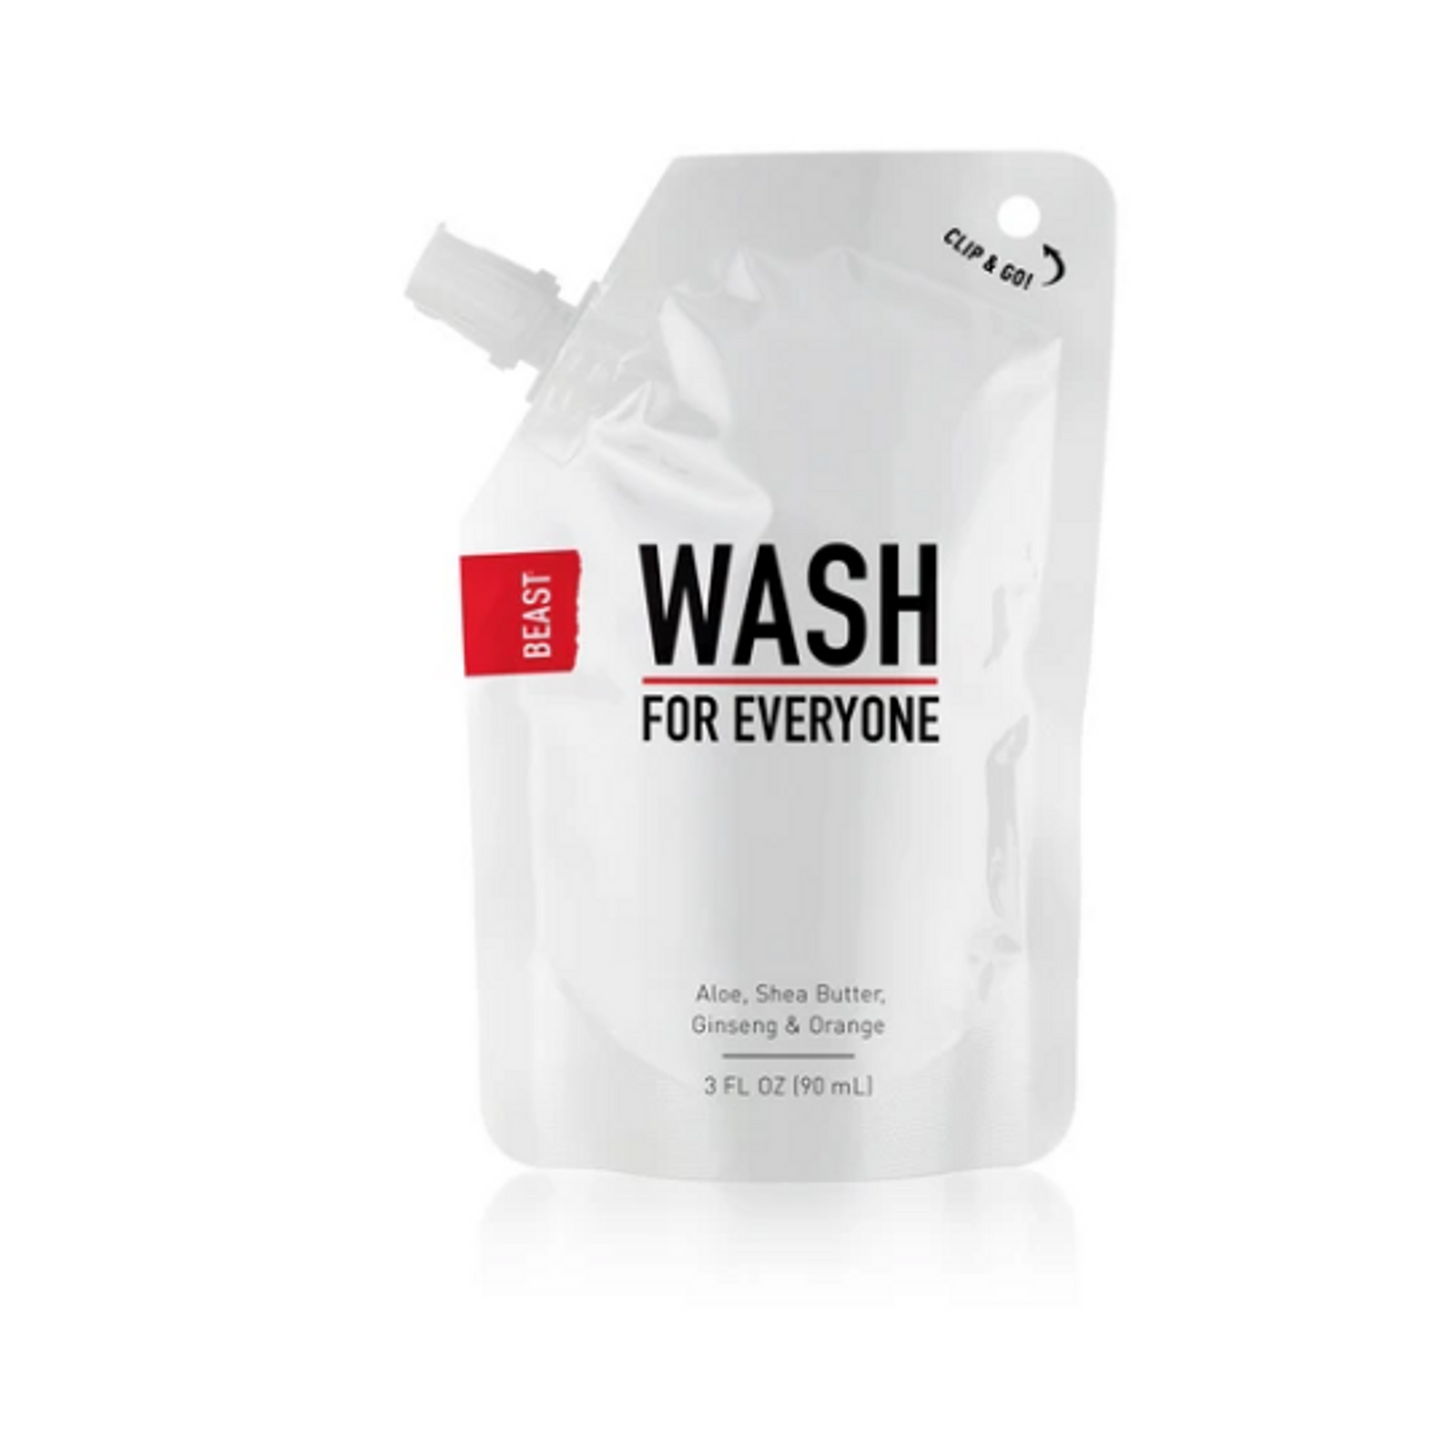 Beast Brands Gentle Wash for Everyone Travel Size Refill Bag - 3oz.